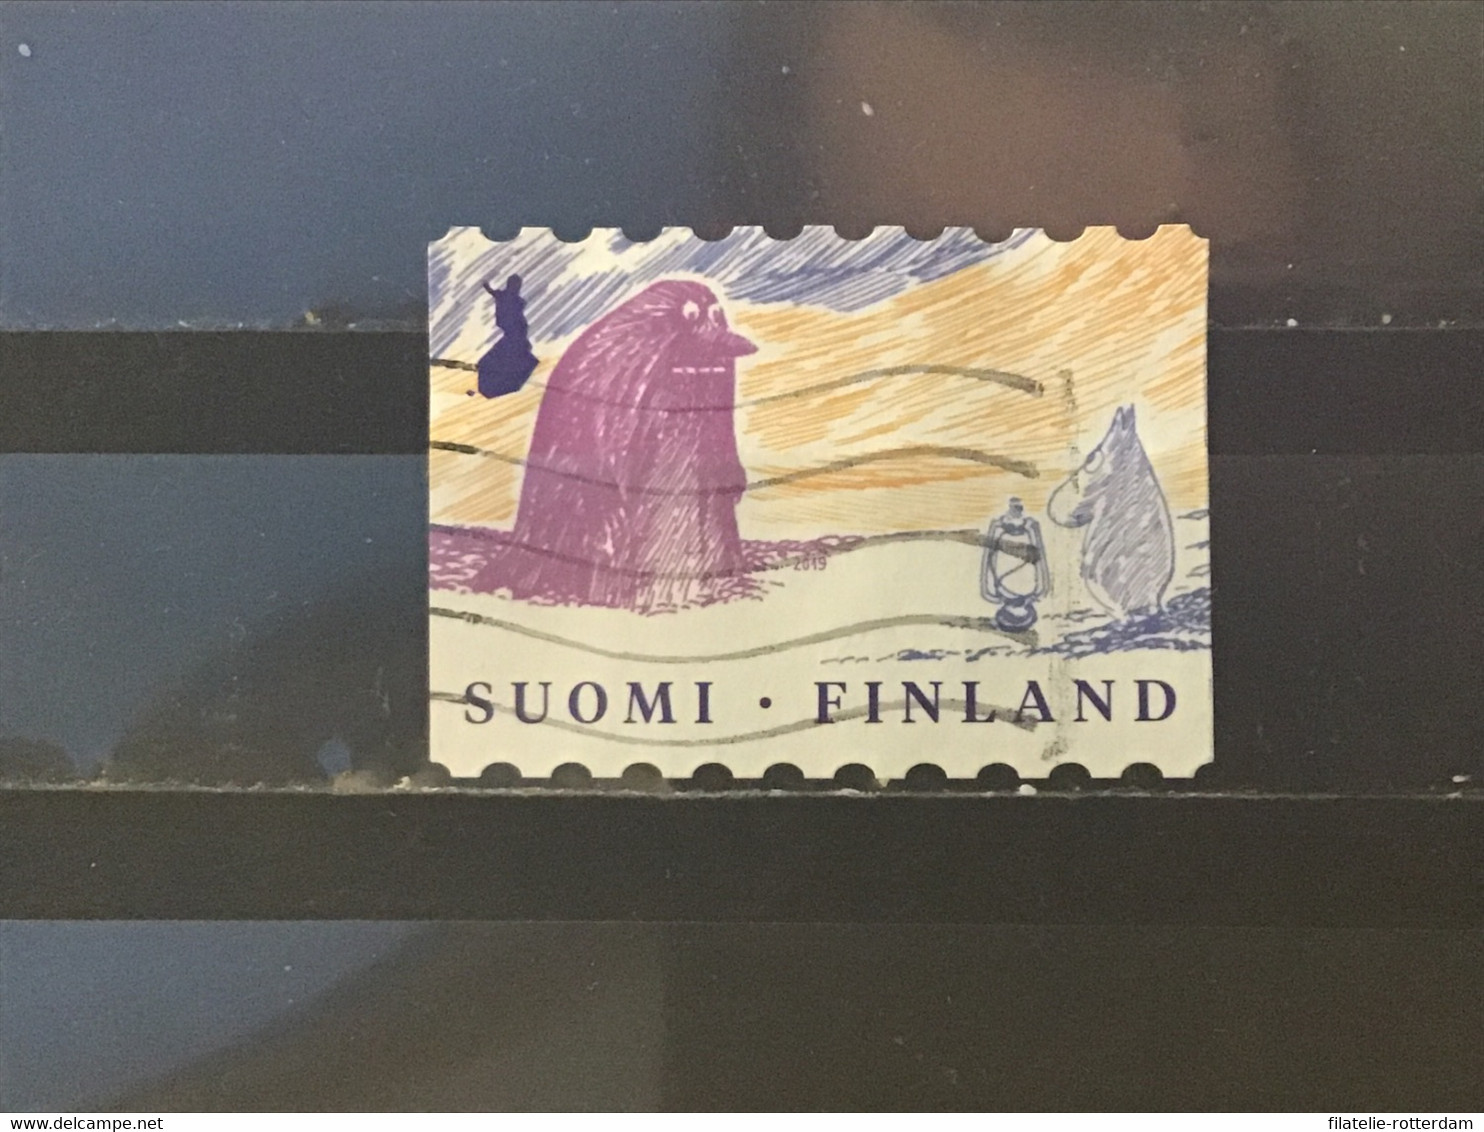 Finland - Moomins 2019 - Used Stamps